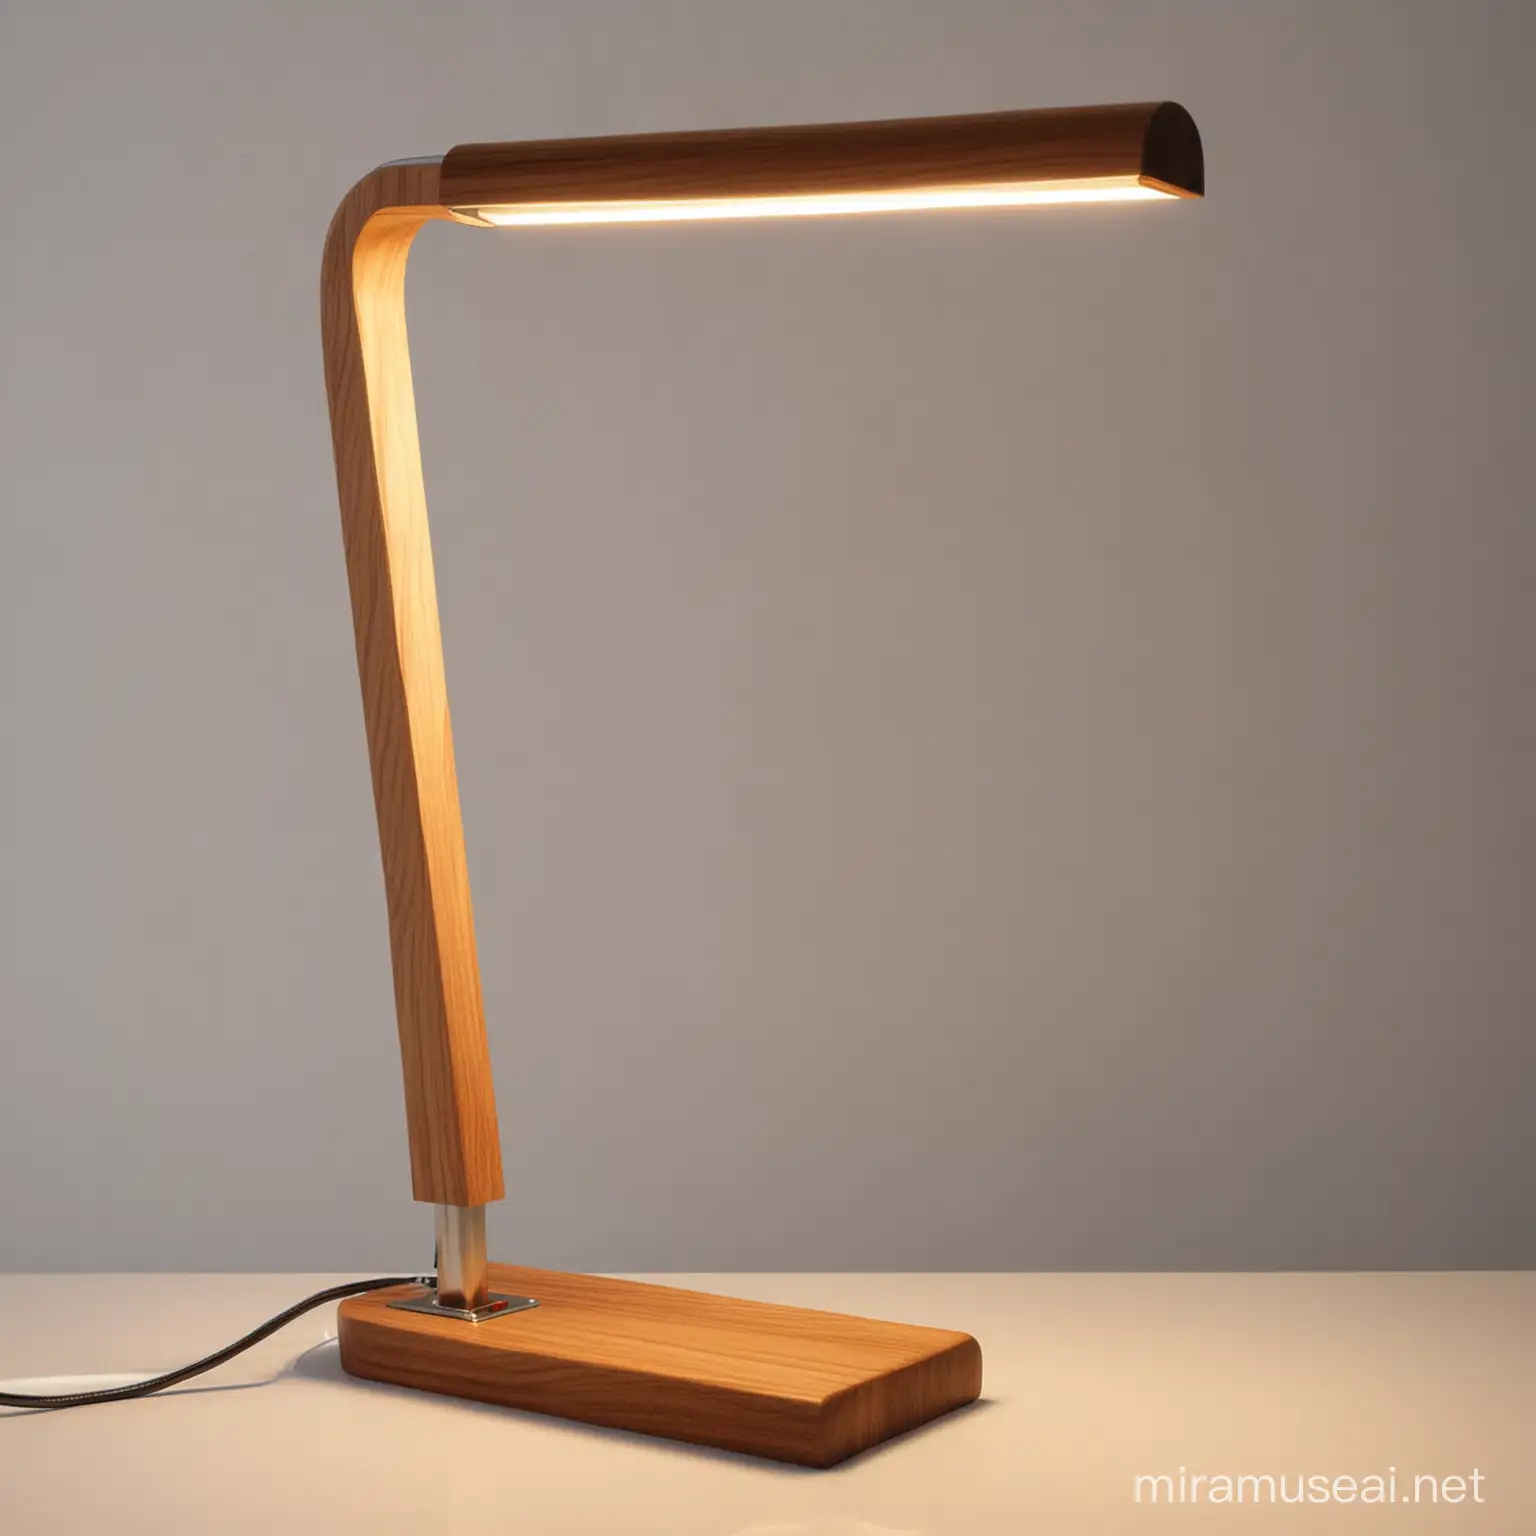 Contemporary Wooden LED Desk Lamp with Adjustable Bend